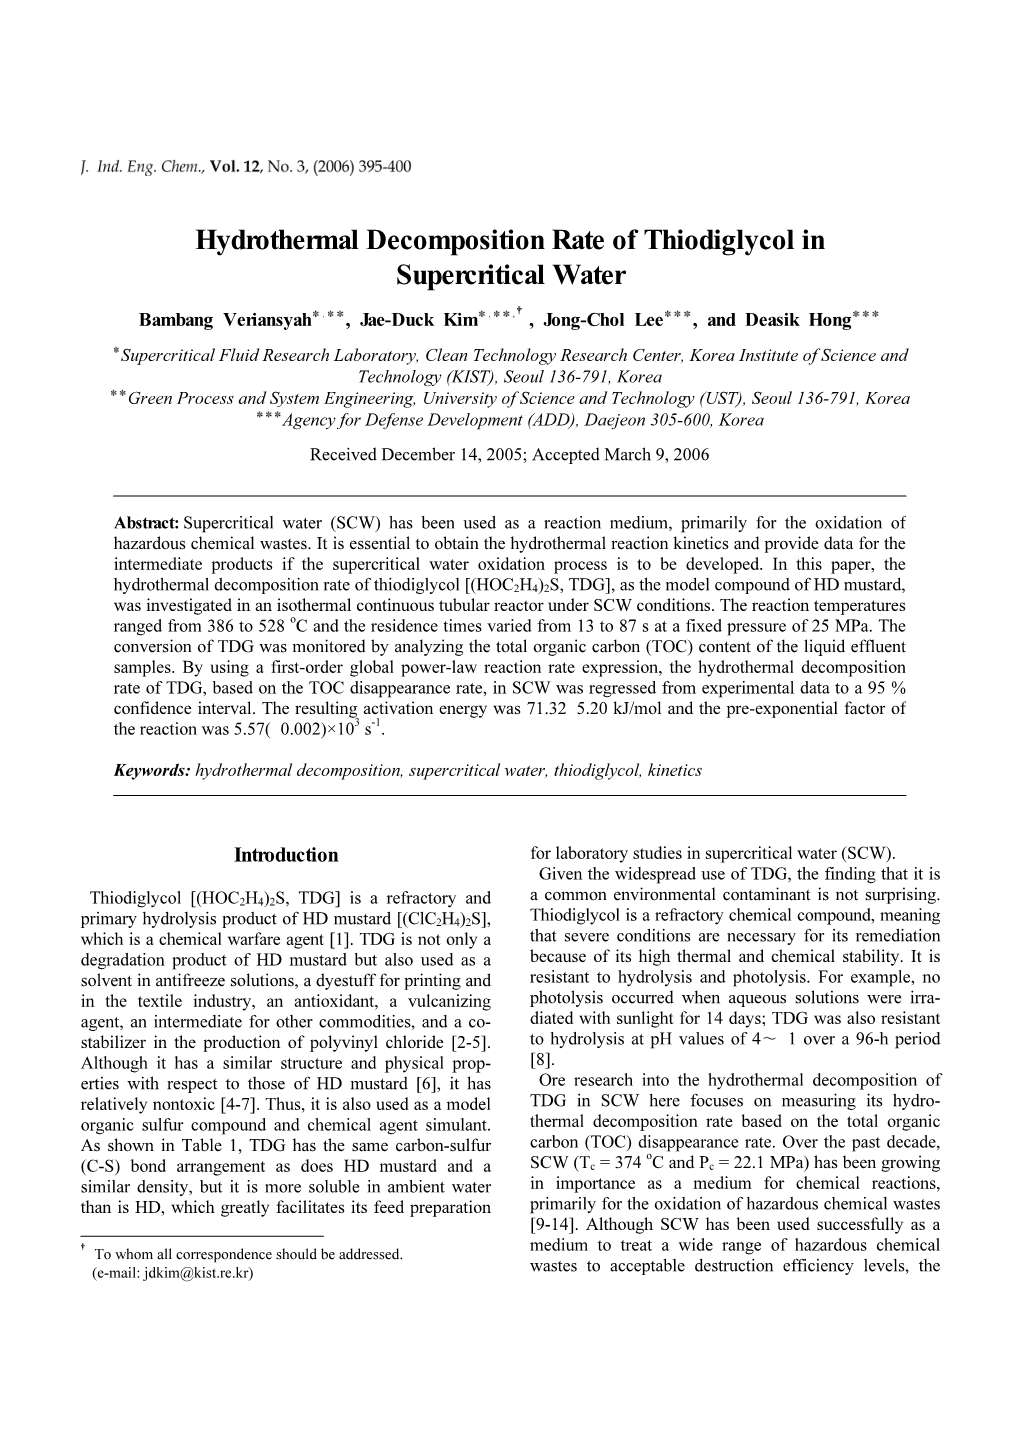 Hydrothermal Decomposition Rate of Thiodiglycol in Supercritical Water